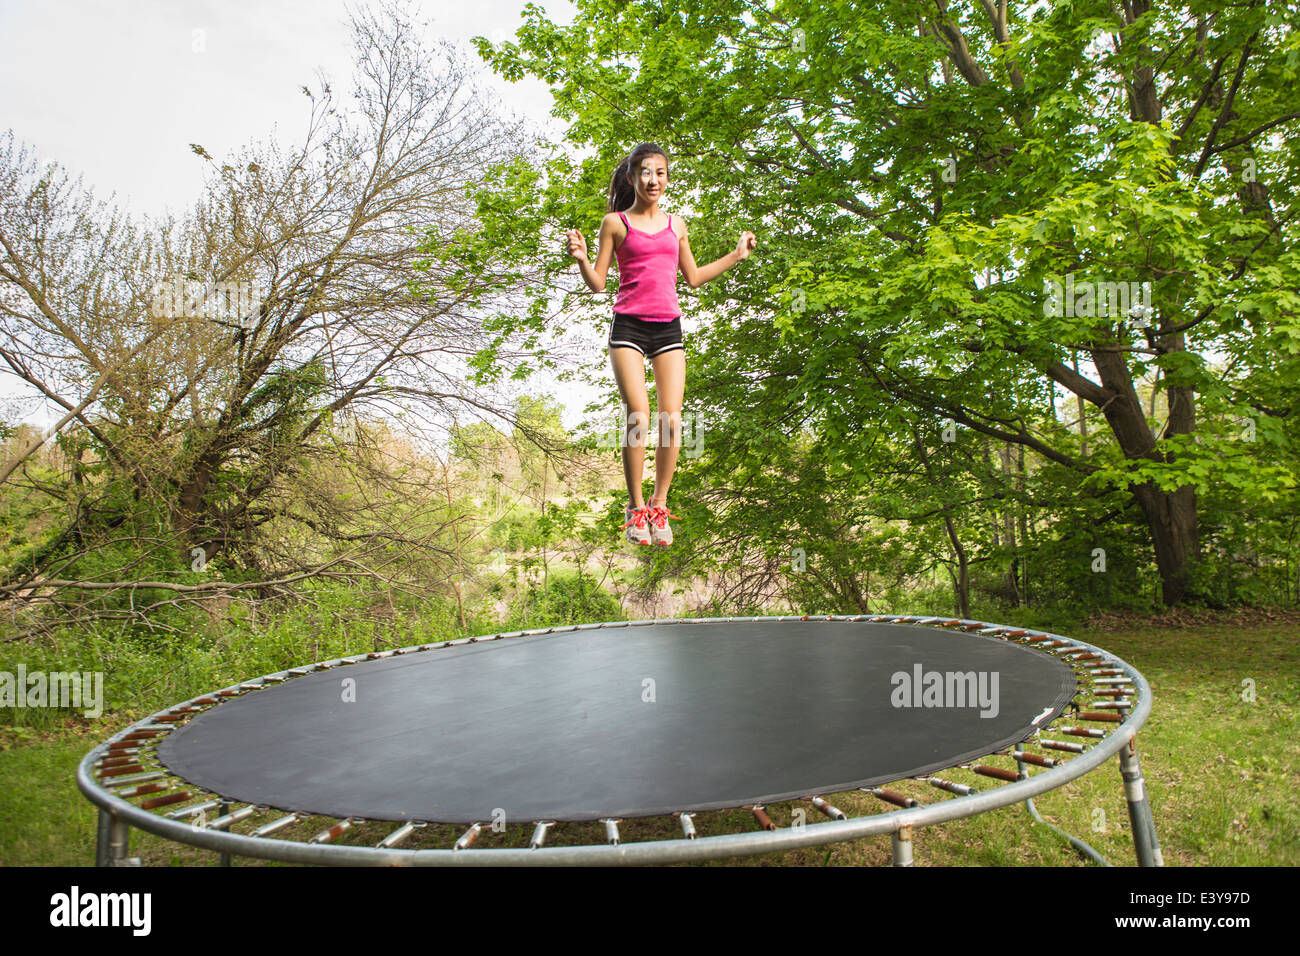 Teenage girl jumping on trampoline, outdoors Stock Photo